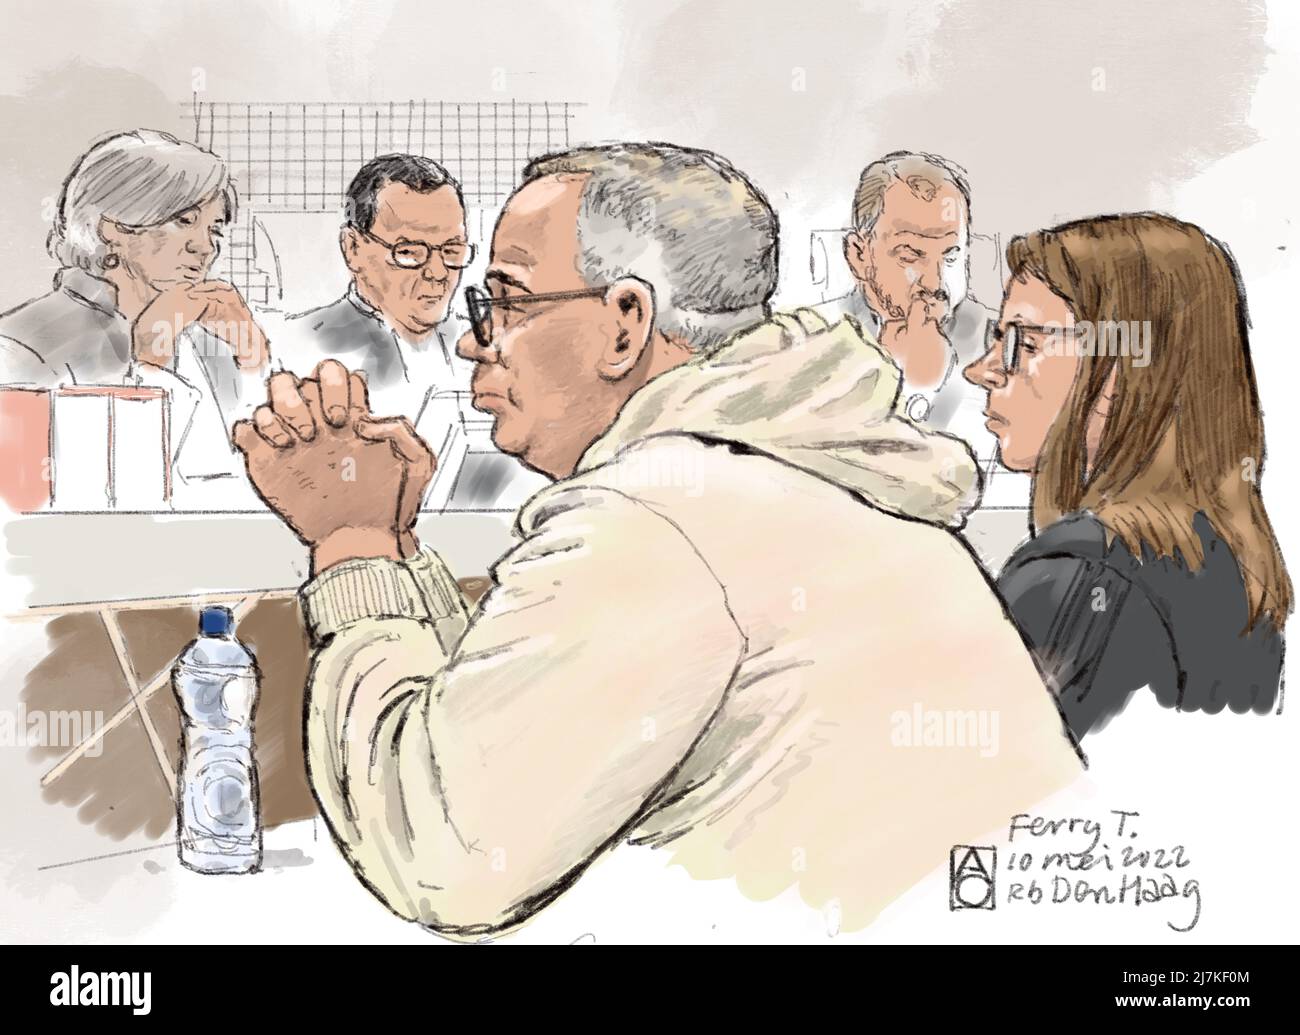 2022-05-10 11:00:00 THE HAGUE - Court drawing of suspect Ferry T. who is on trial for stabbing a 23-year-old rugby player to death. The body of Renée Barendrecht was found lifeless on Sunday 23 May 2021 next to the cycle path of the Doorniksestraat near the Scheveningse Bosjes. ANP ALOYS OOSTERWIJK netherlands out - belgium out Stock Photo